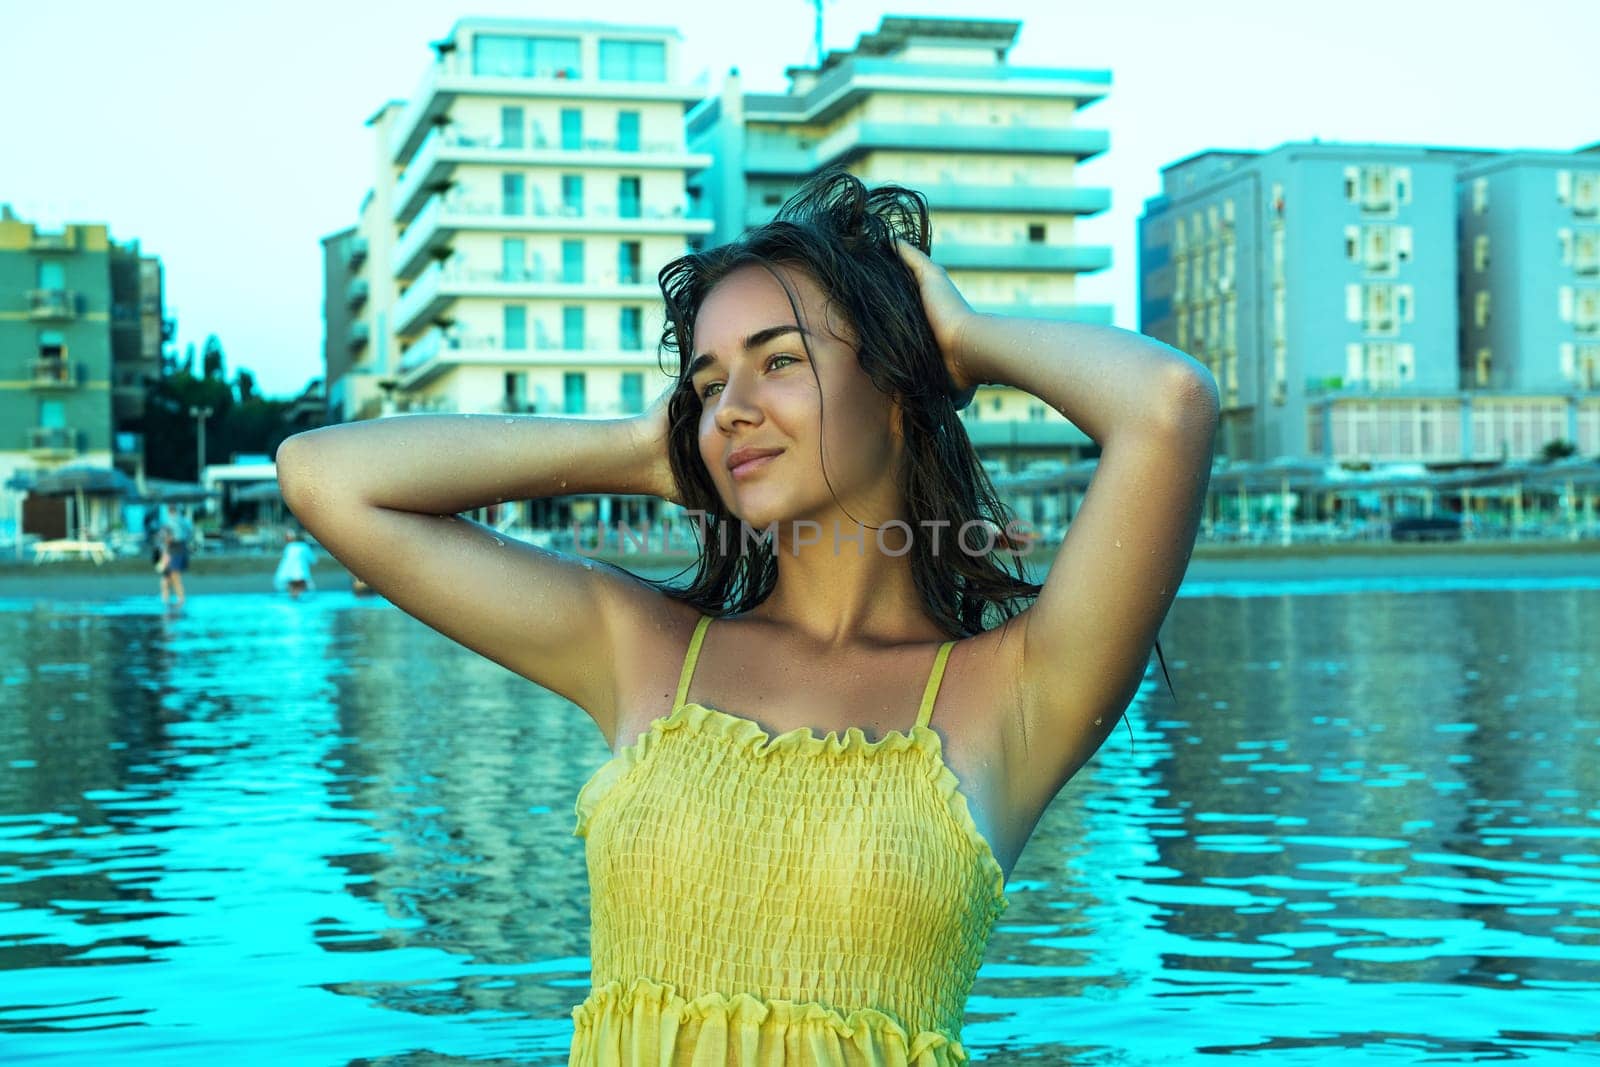 An attractive model with long hair poses with her hands raised behind her head at sunrise.